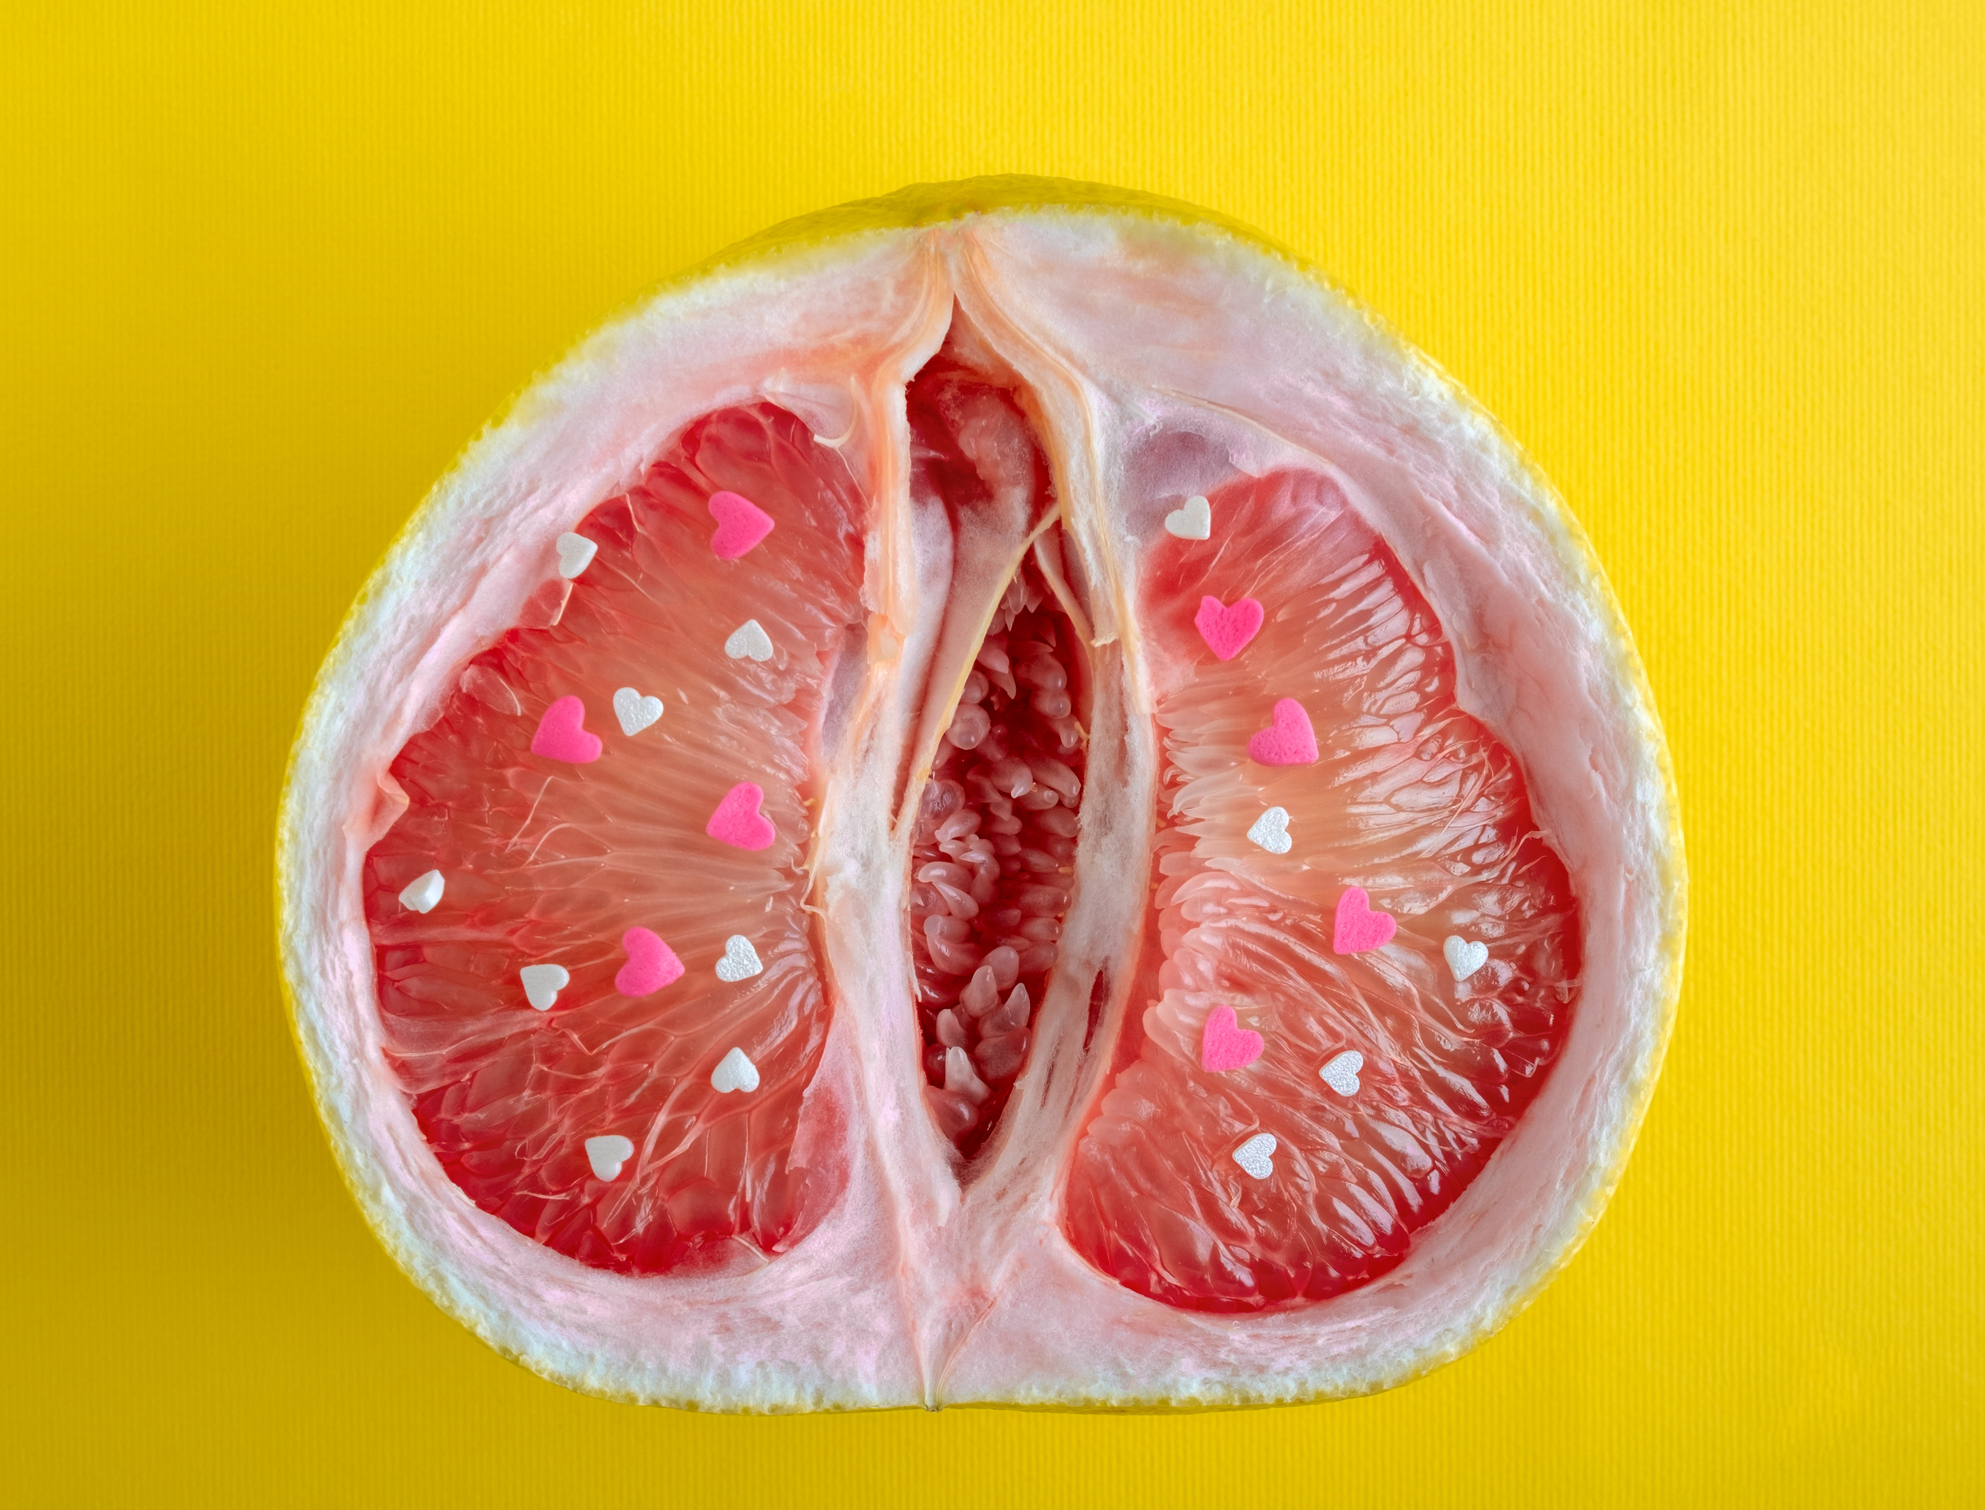 A halved grapefruit with pink and white paper hearts on the segments, set against a yellow background